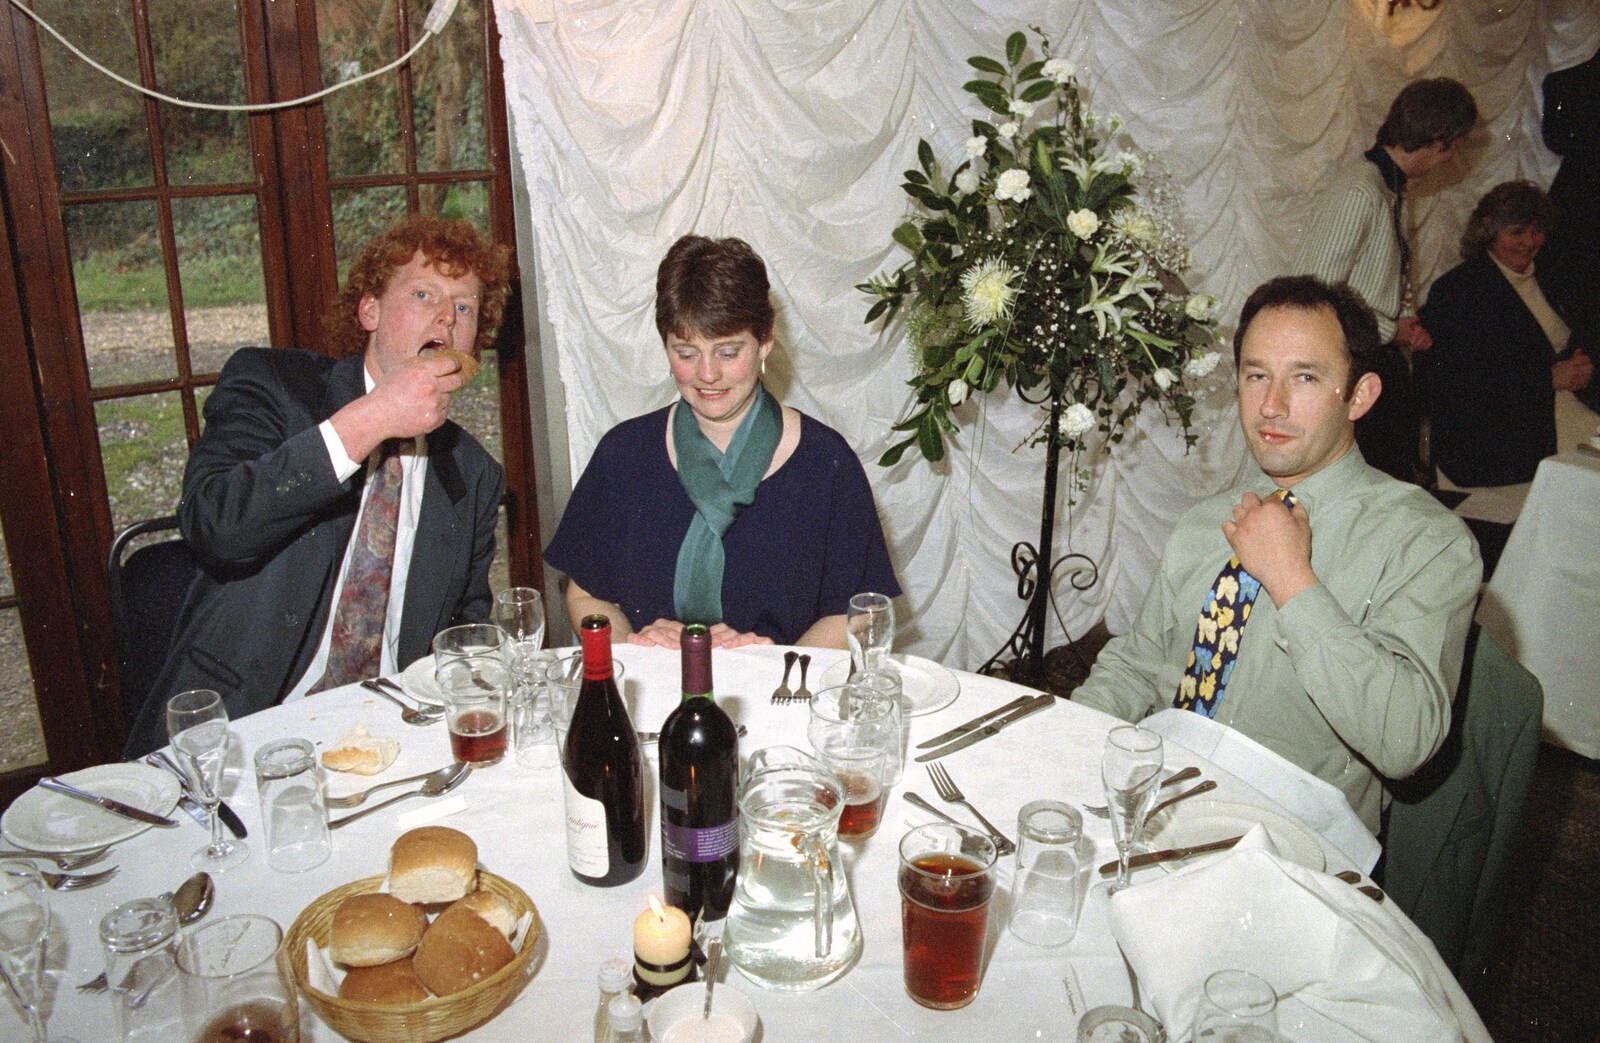 Wavy, Pippa and DH from The Brome Swan at Graham and Pauline's Wedding, Gissing Hall, Norfolk - 28th April 1997